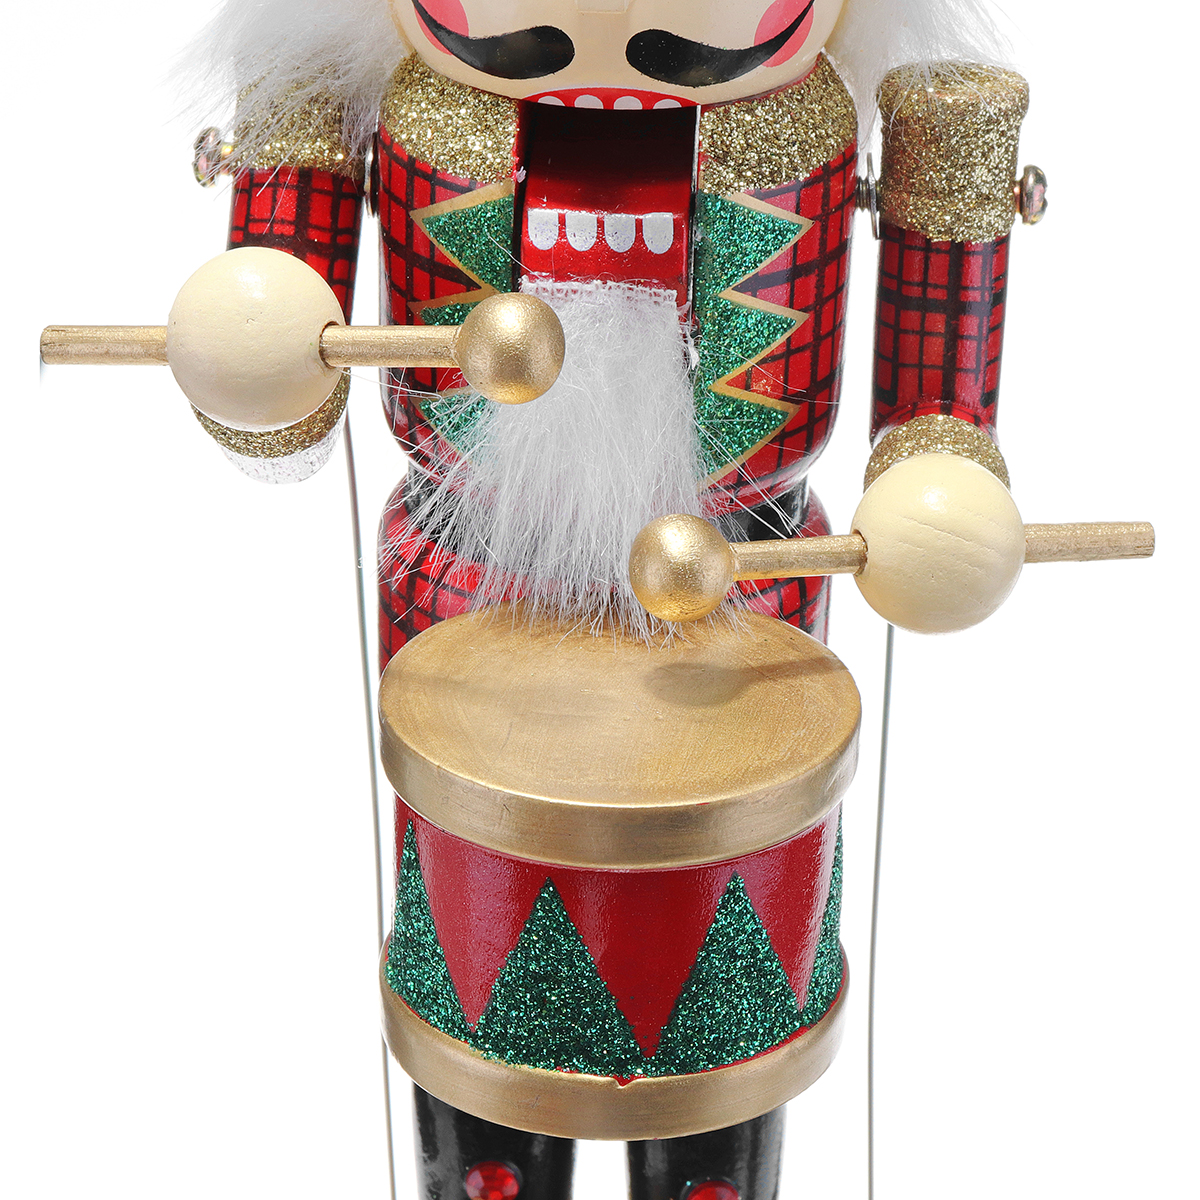 32CM-Wooden-Guard-Nutcracker-Soldier-Toy-Music-Box-Christmas-Decorations-Xmas-Gift-1605612-10